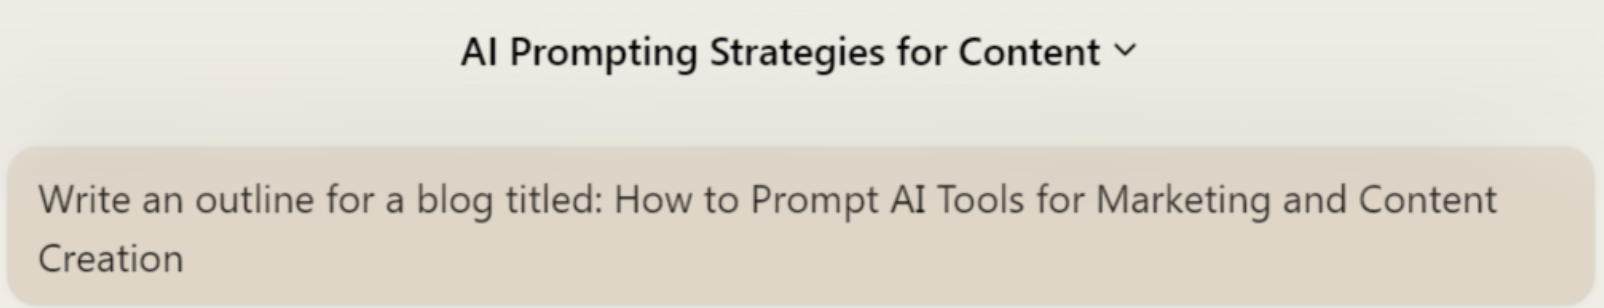 AI prompting strategies for content